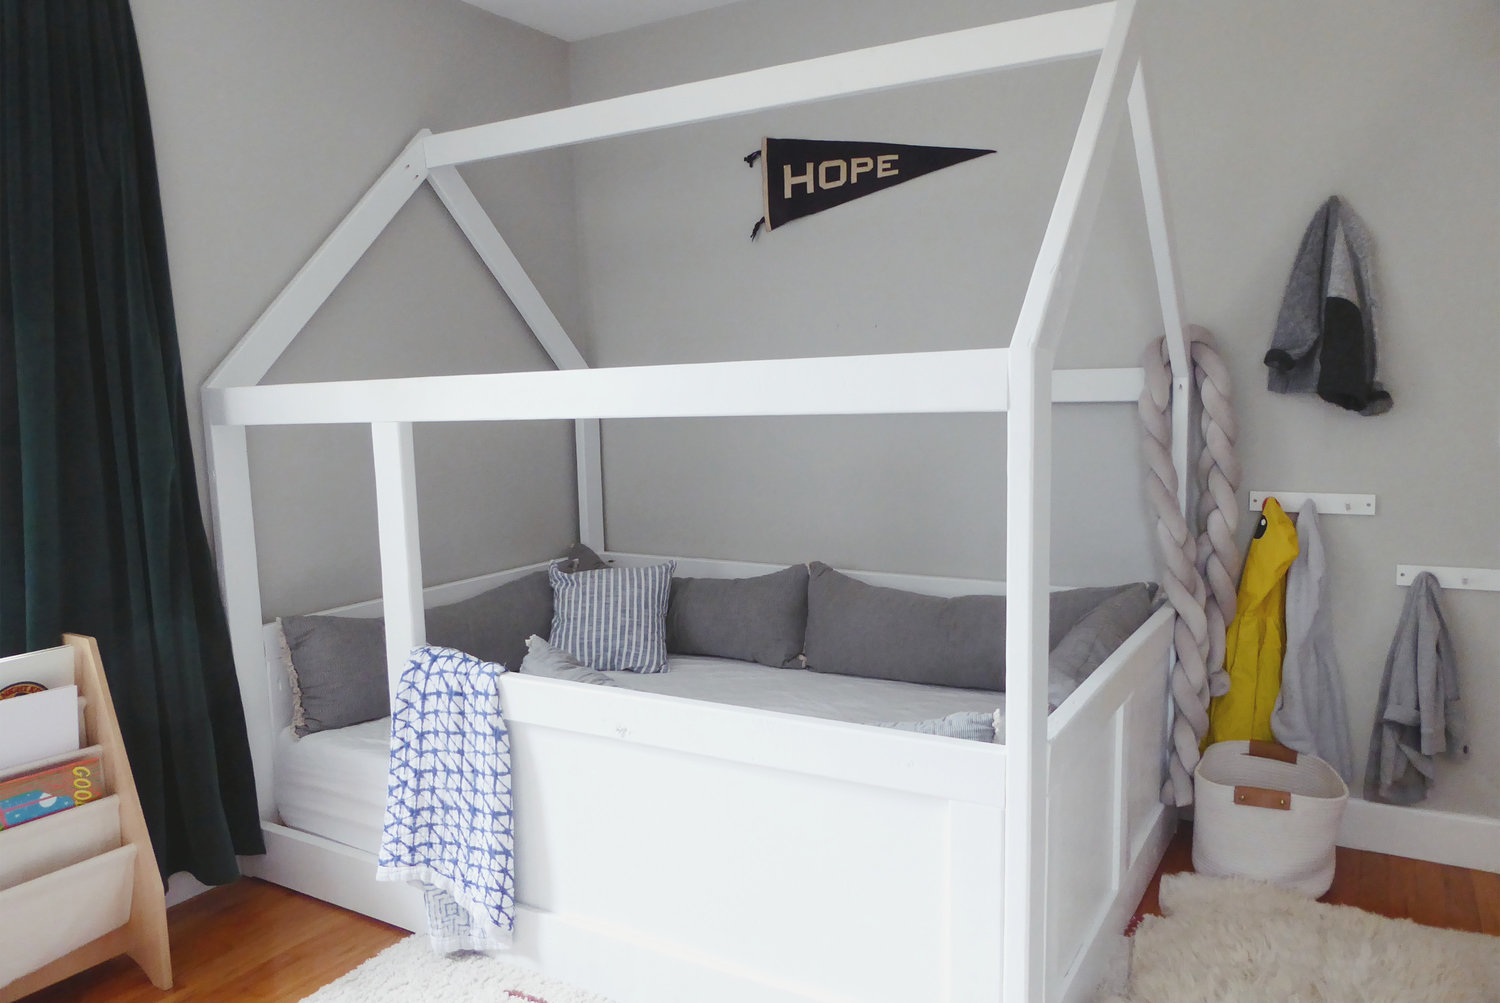 A prized DIY project is the bed built by Souza for the couple’s young son